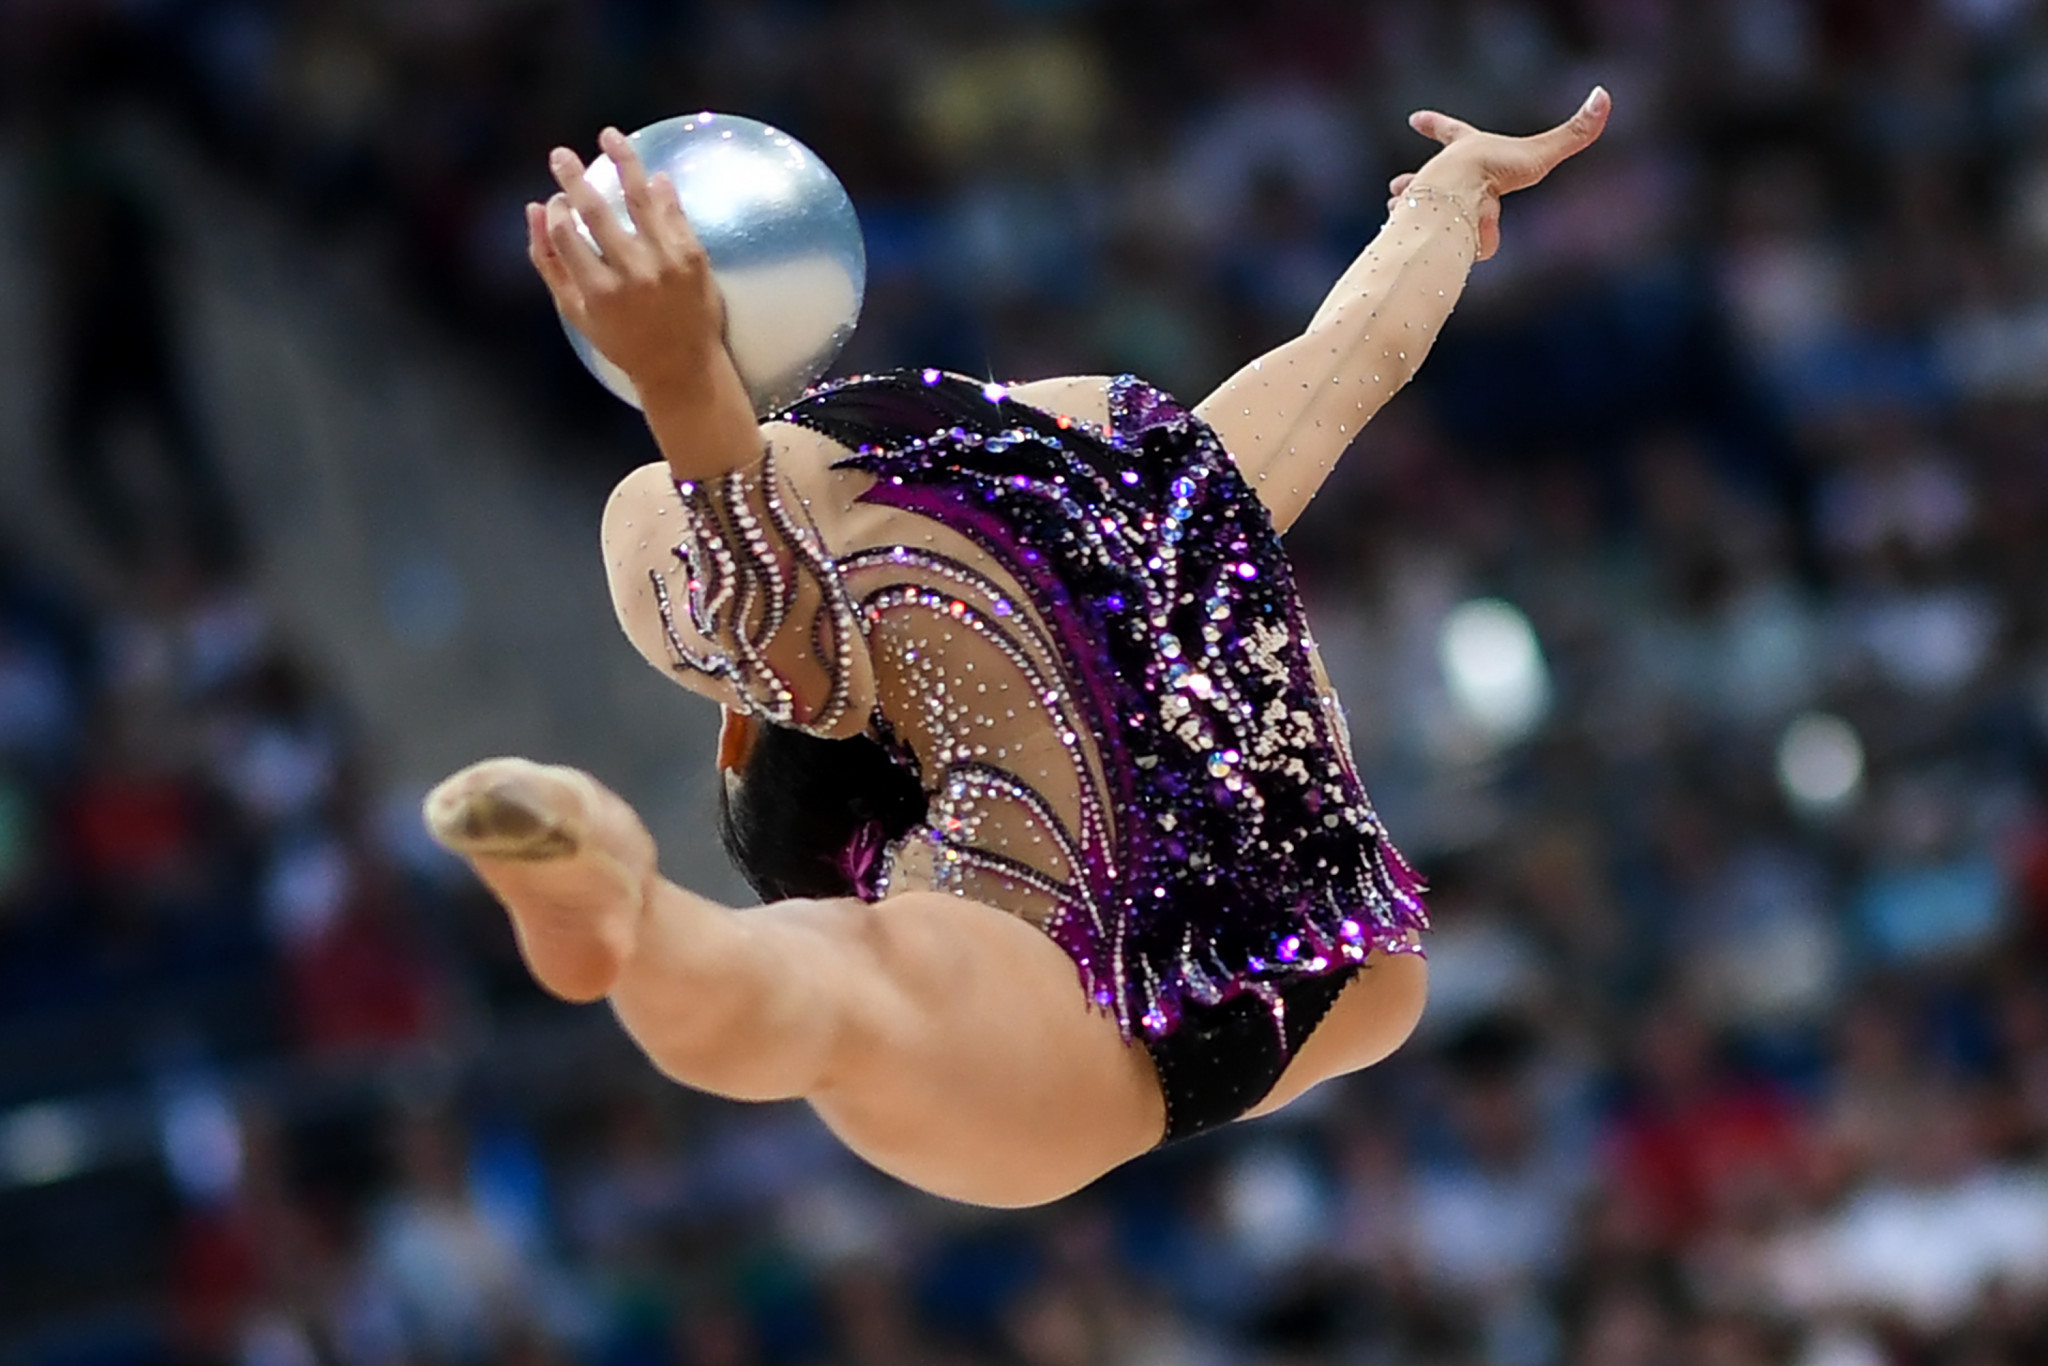 Israel's Linoy Ashram was the victor in the rhythmic gymnastics ball and clubs ©Getty Images